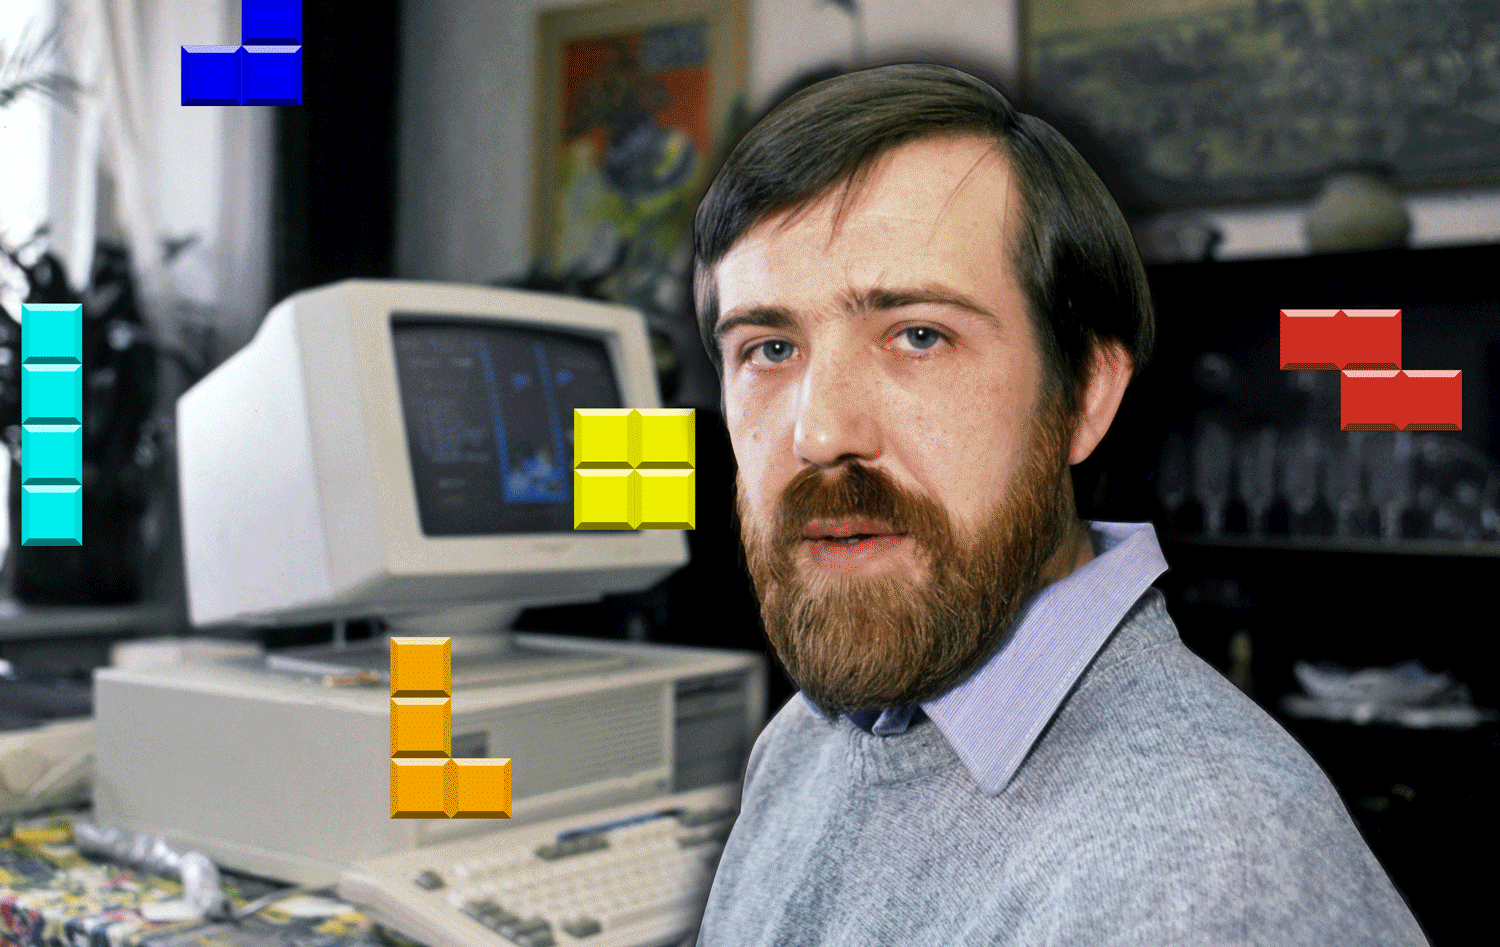 A man poses in front of a 1980s computer as digital Tetris shapes fall around him.